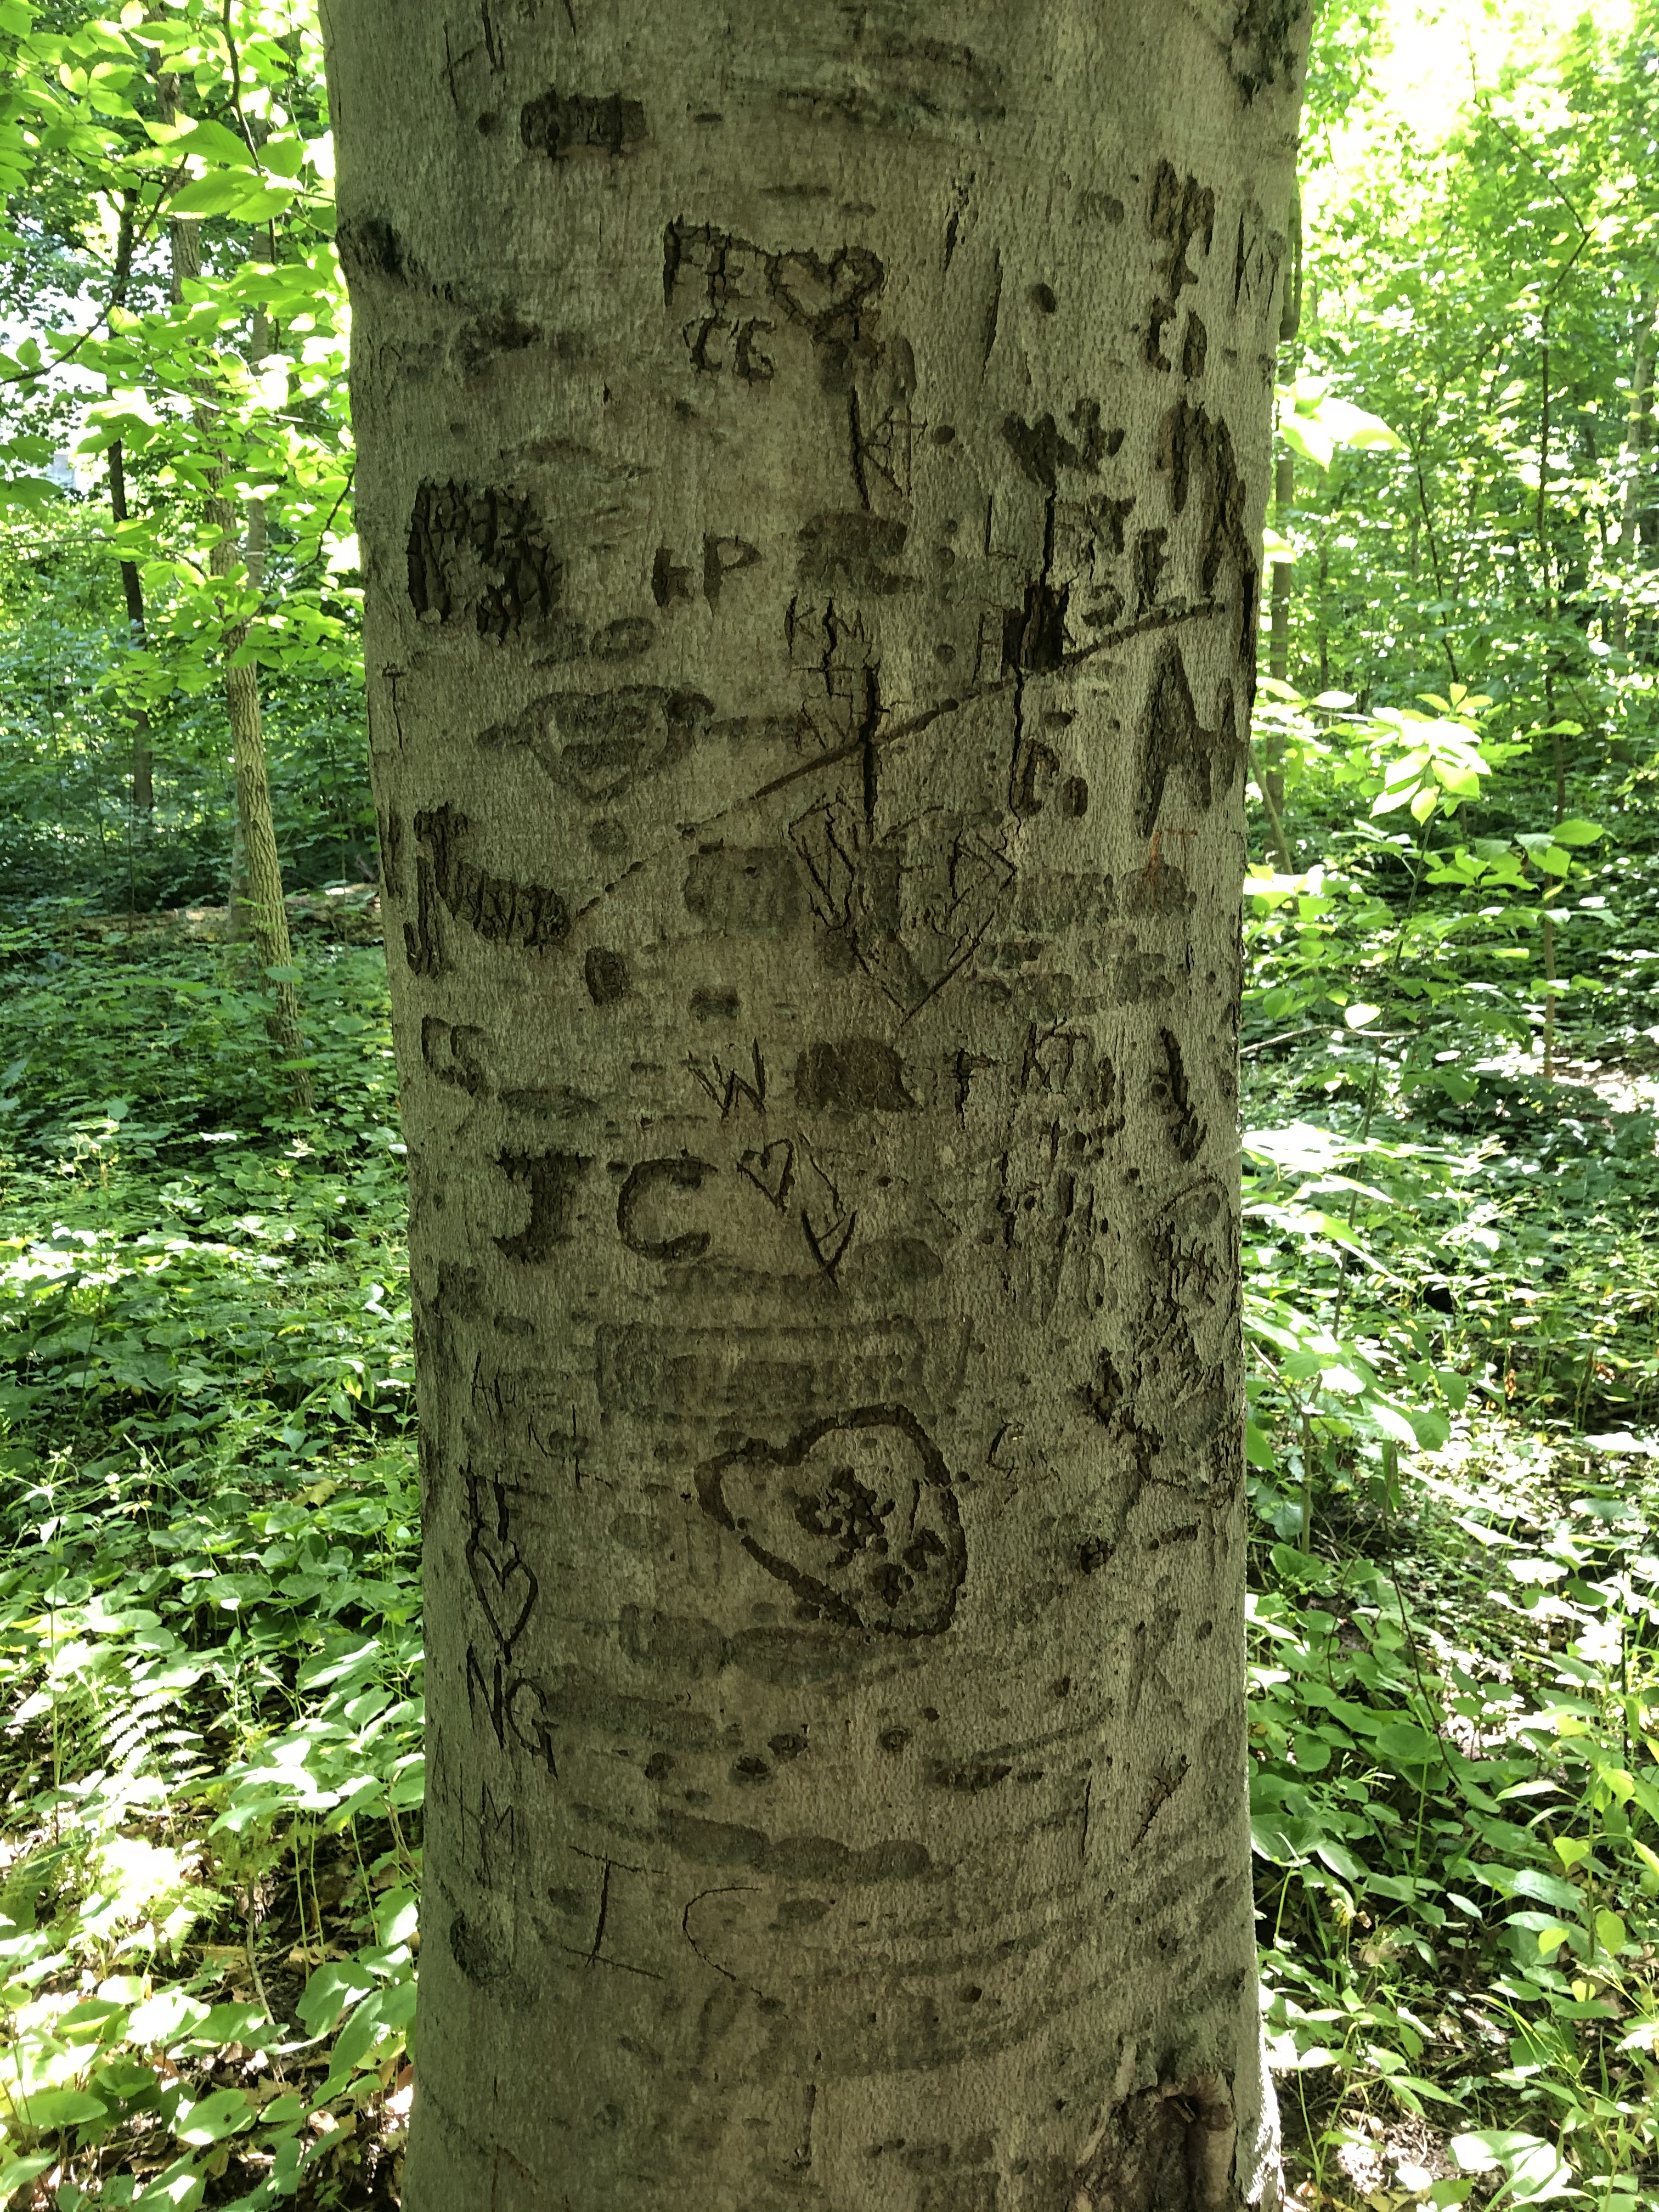 A tree found in Dunn's Woods